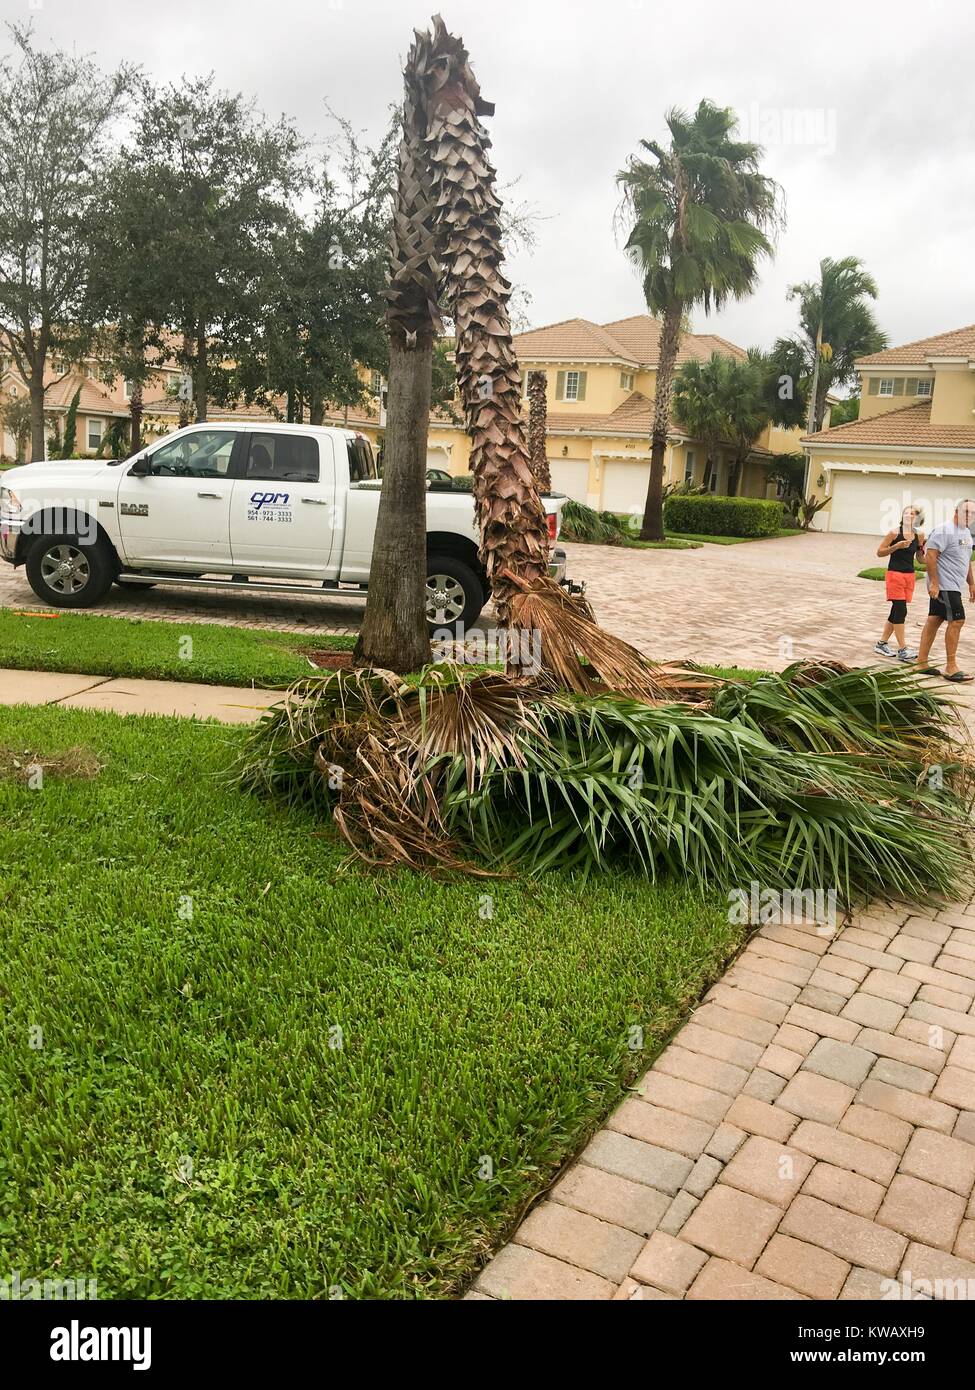 A couple walks through the cul-de-sac of a housing development and views a damaged palm tree which has been snapped in half by high winds during Hurricane Matthew, in West Palm Beach, Florida, October 7, 2016. Stock Photo